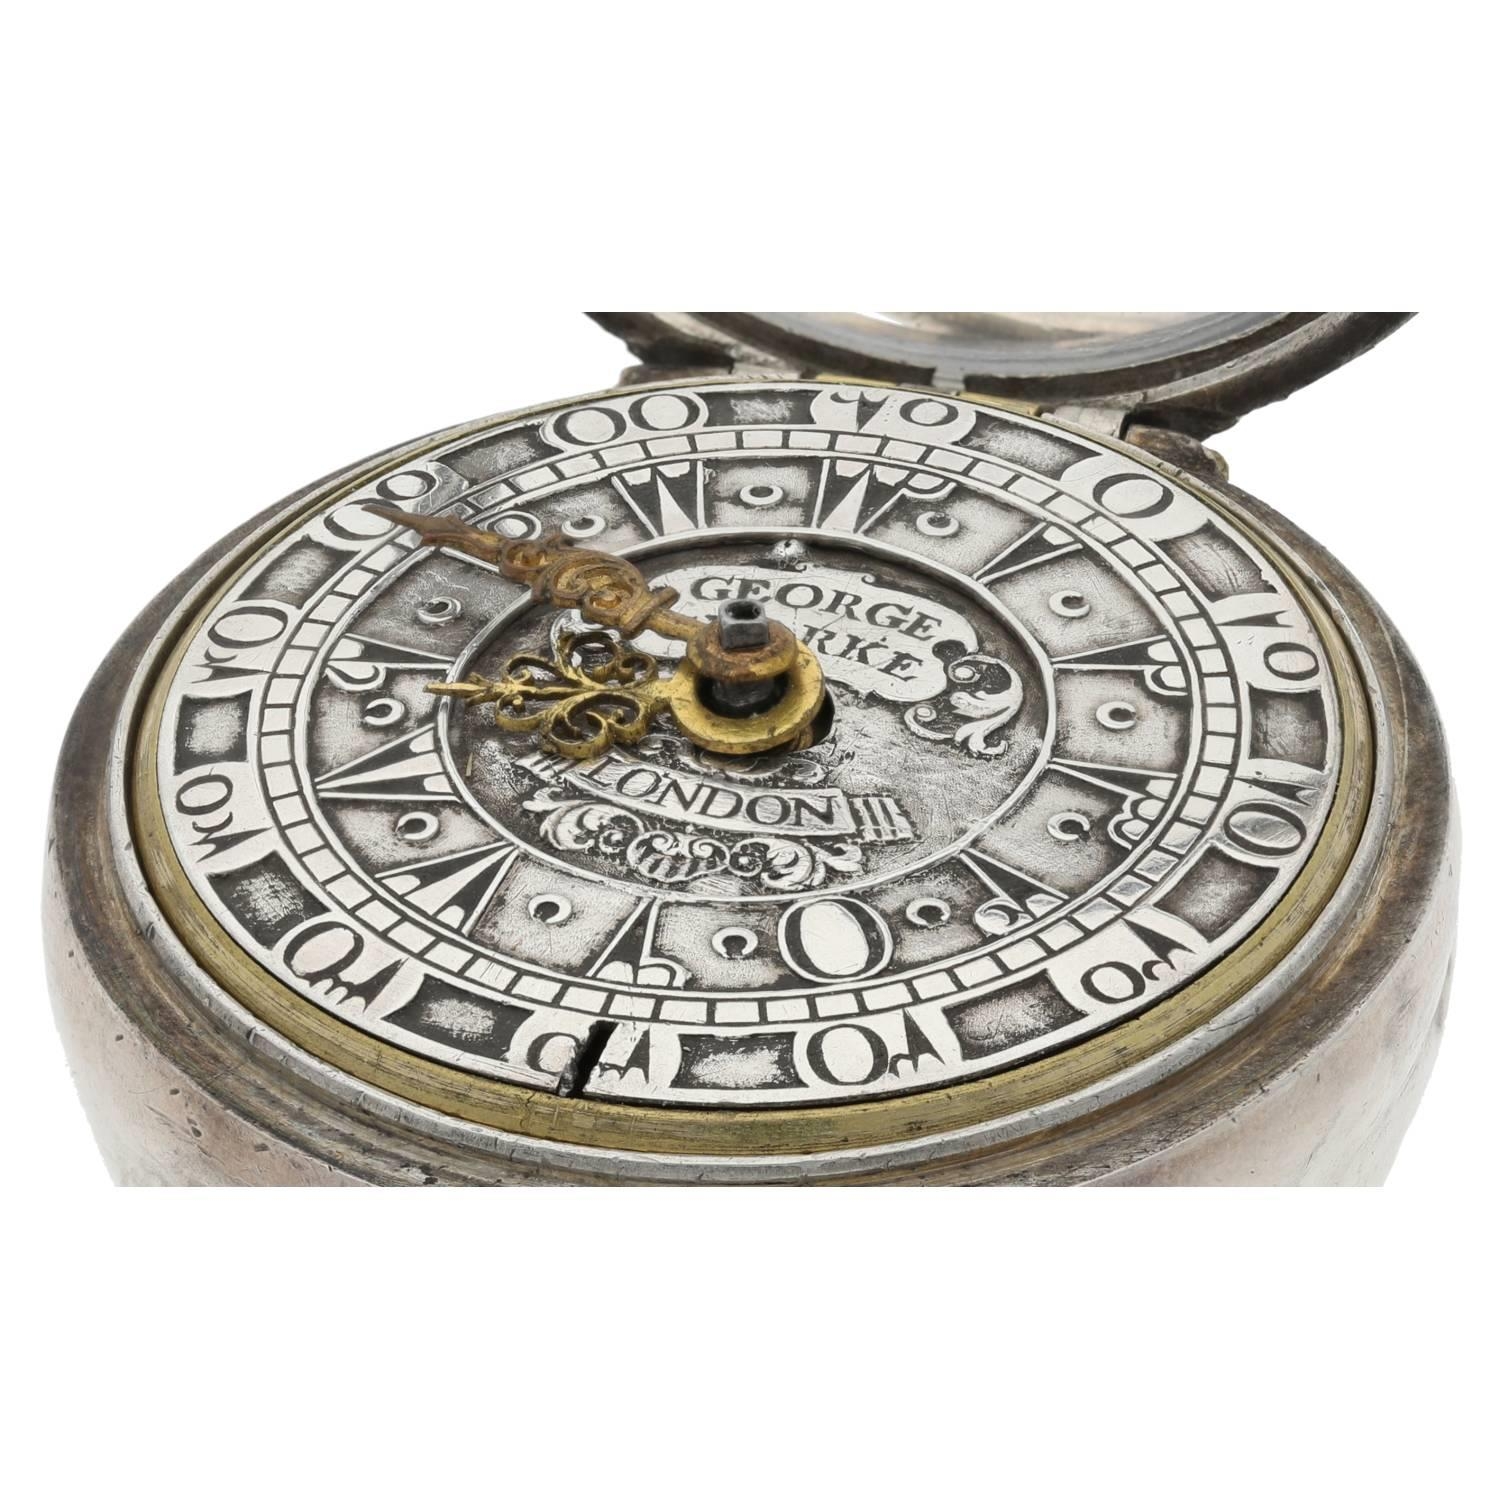 George Clarke, London - mid-18th century silver pair cased verge pocket watch made for the Turkish - Image 8 of 10